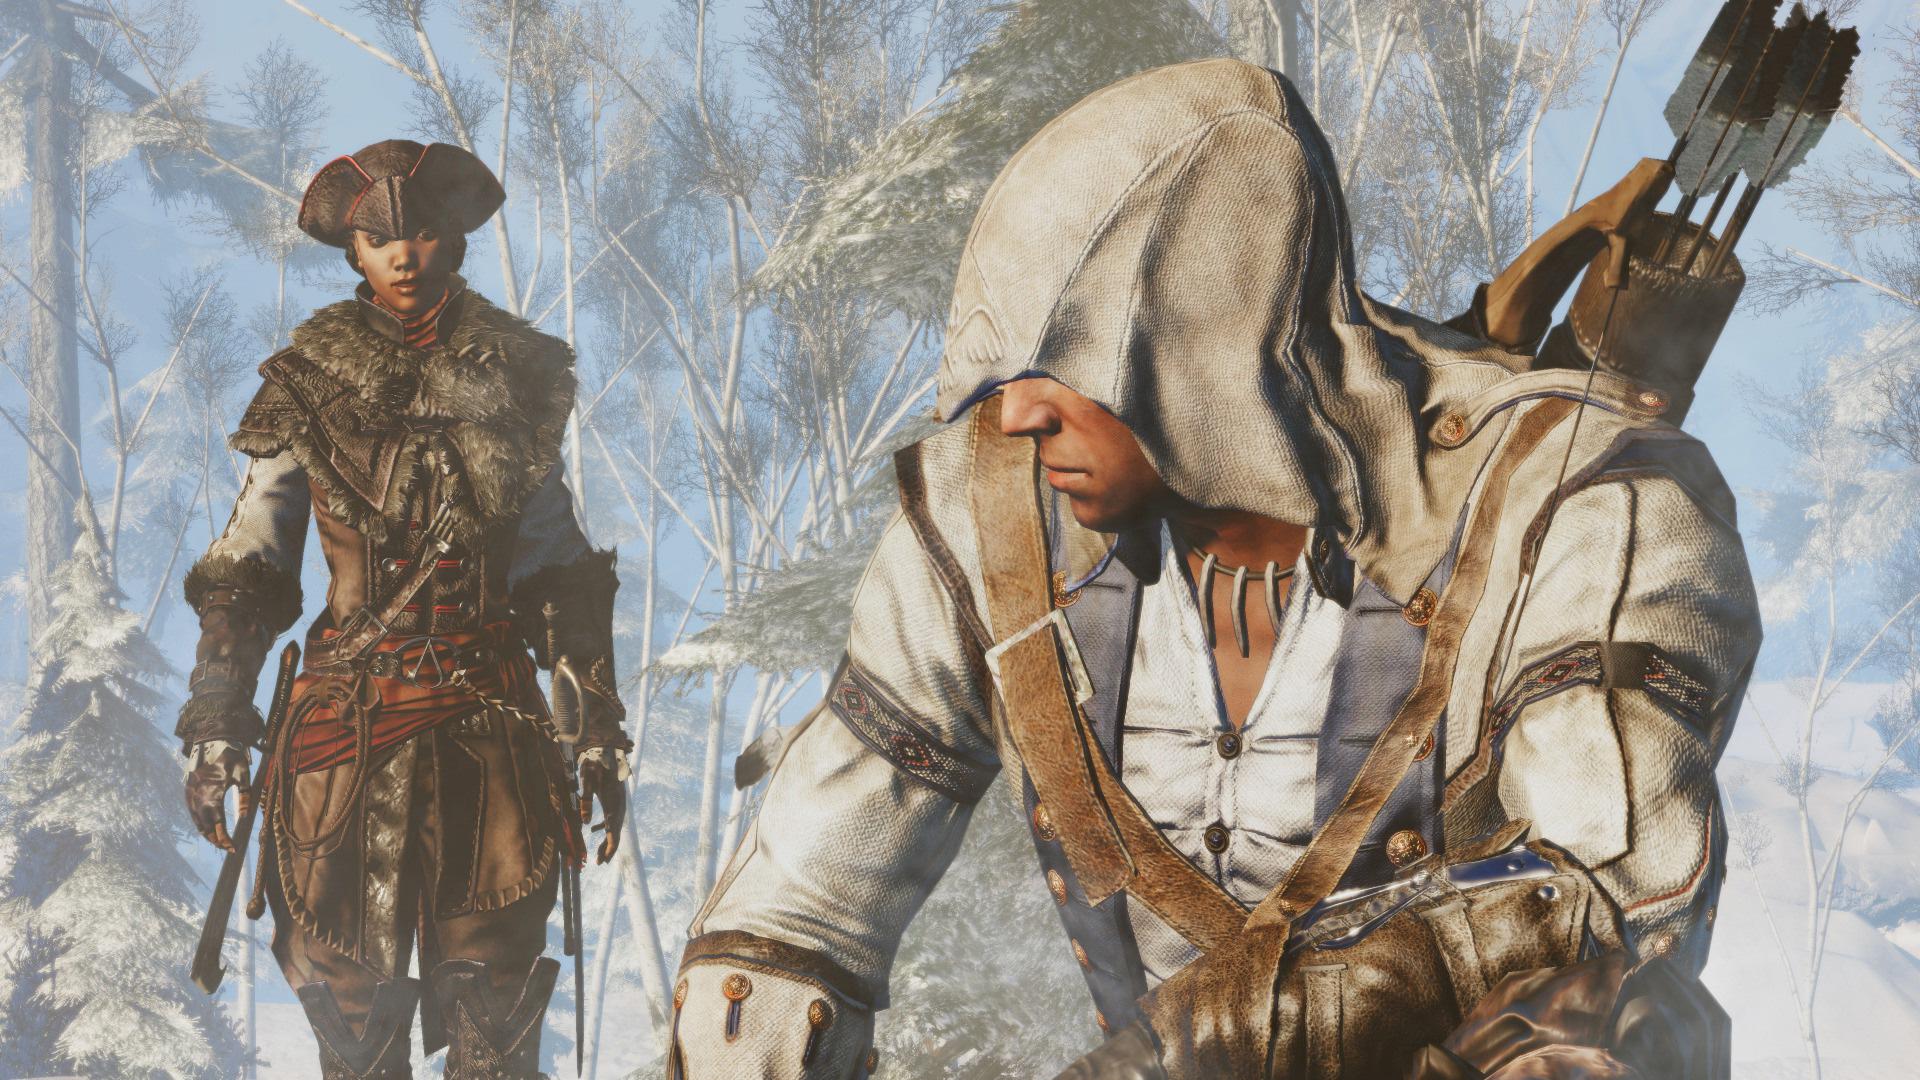 Assassin's Creed III Remastered releases on 29 March, will include